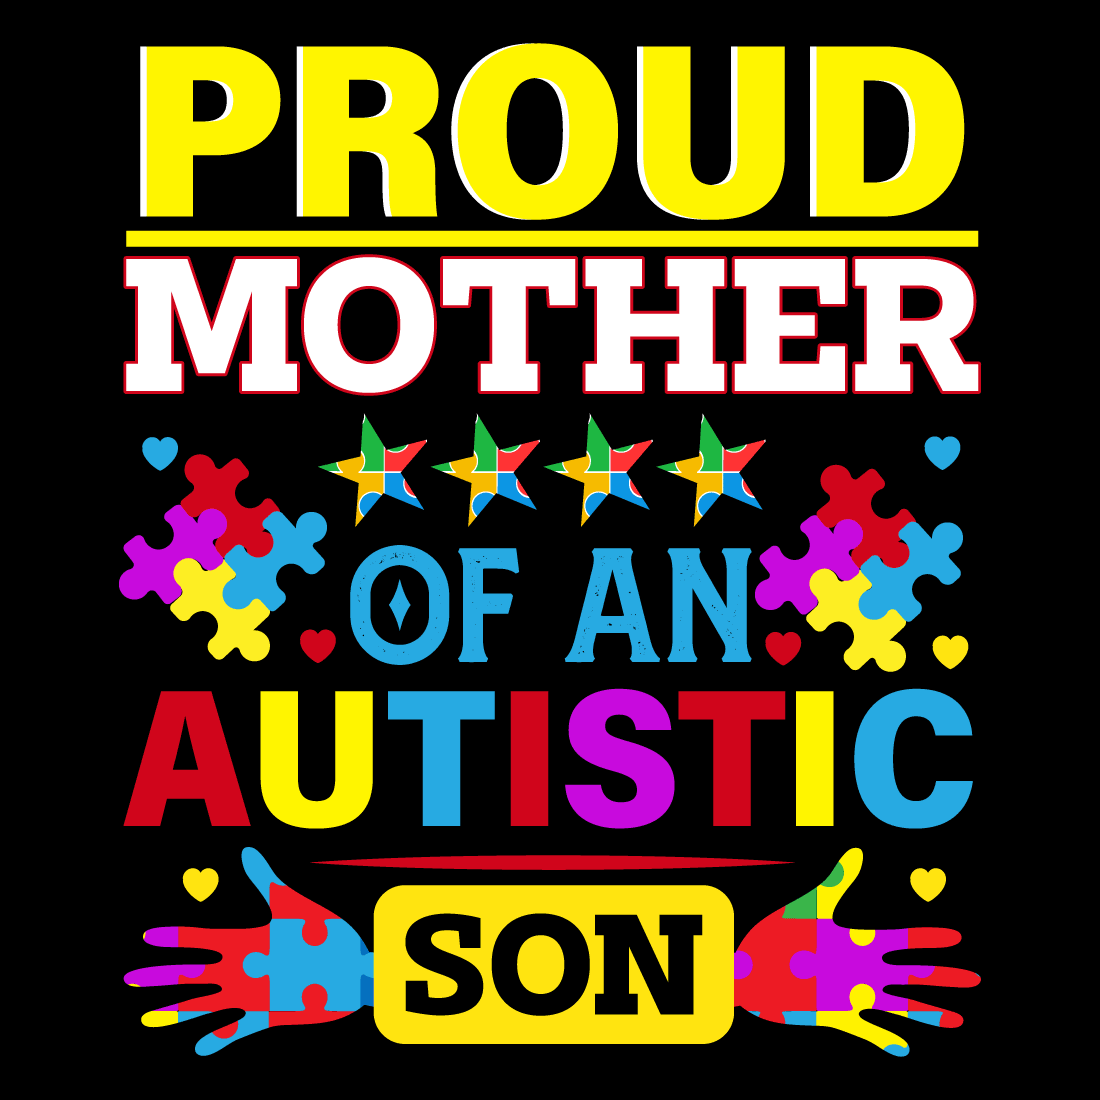 Proud mother of an autistic son.